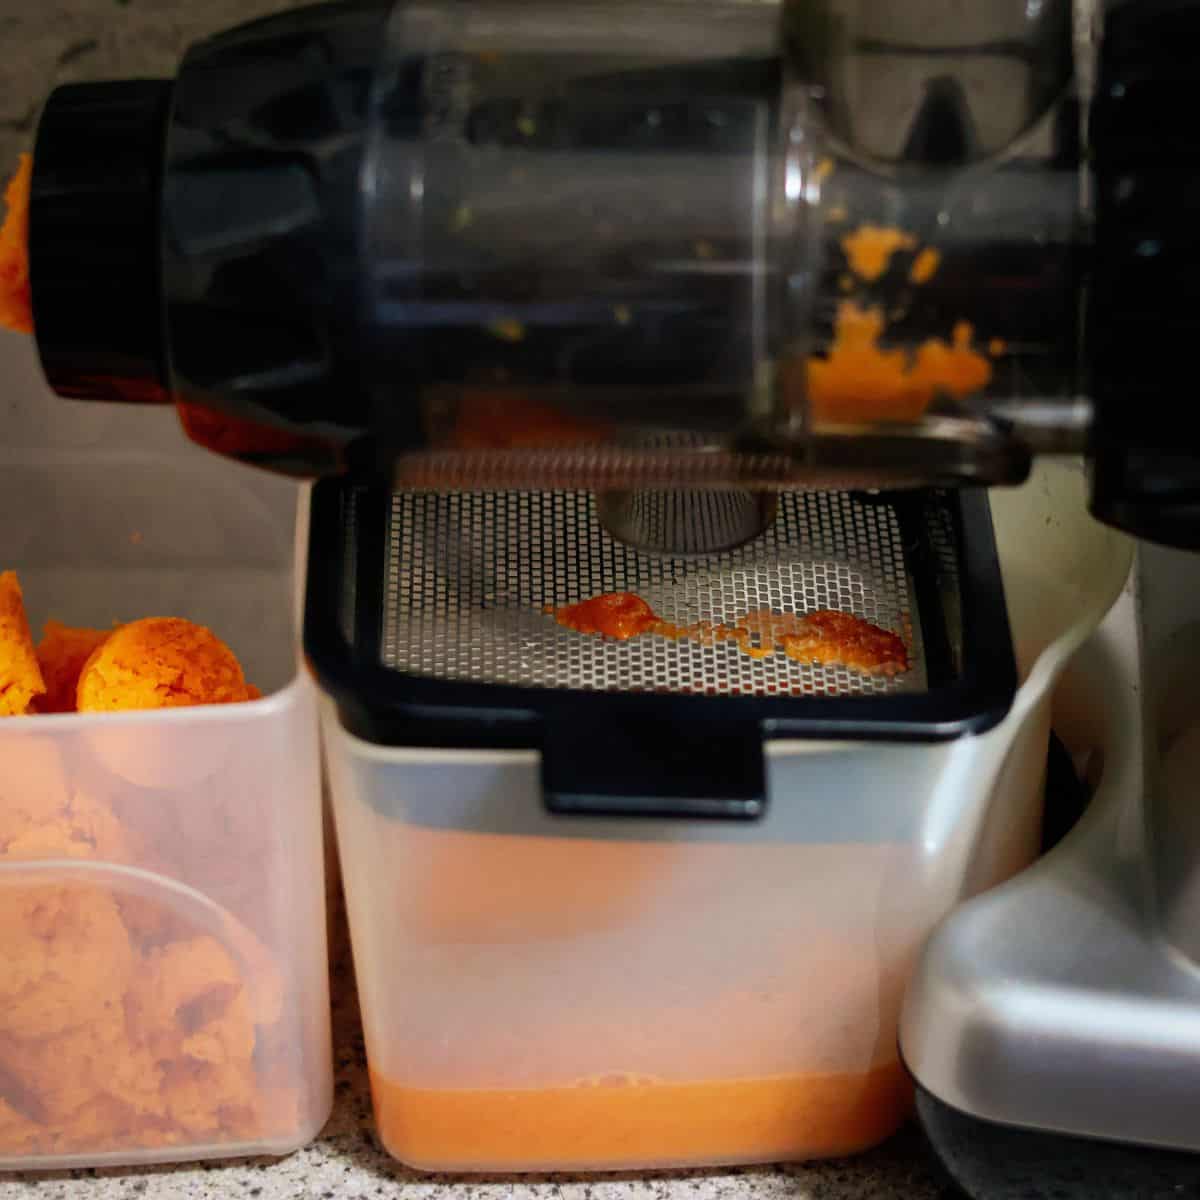 The juicing process in progress, capturing orange-hued sweet potato and carrot pulp being expelled from the juicer while the freshly extracted juice collects in the transparent container below.